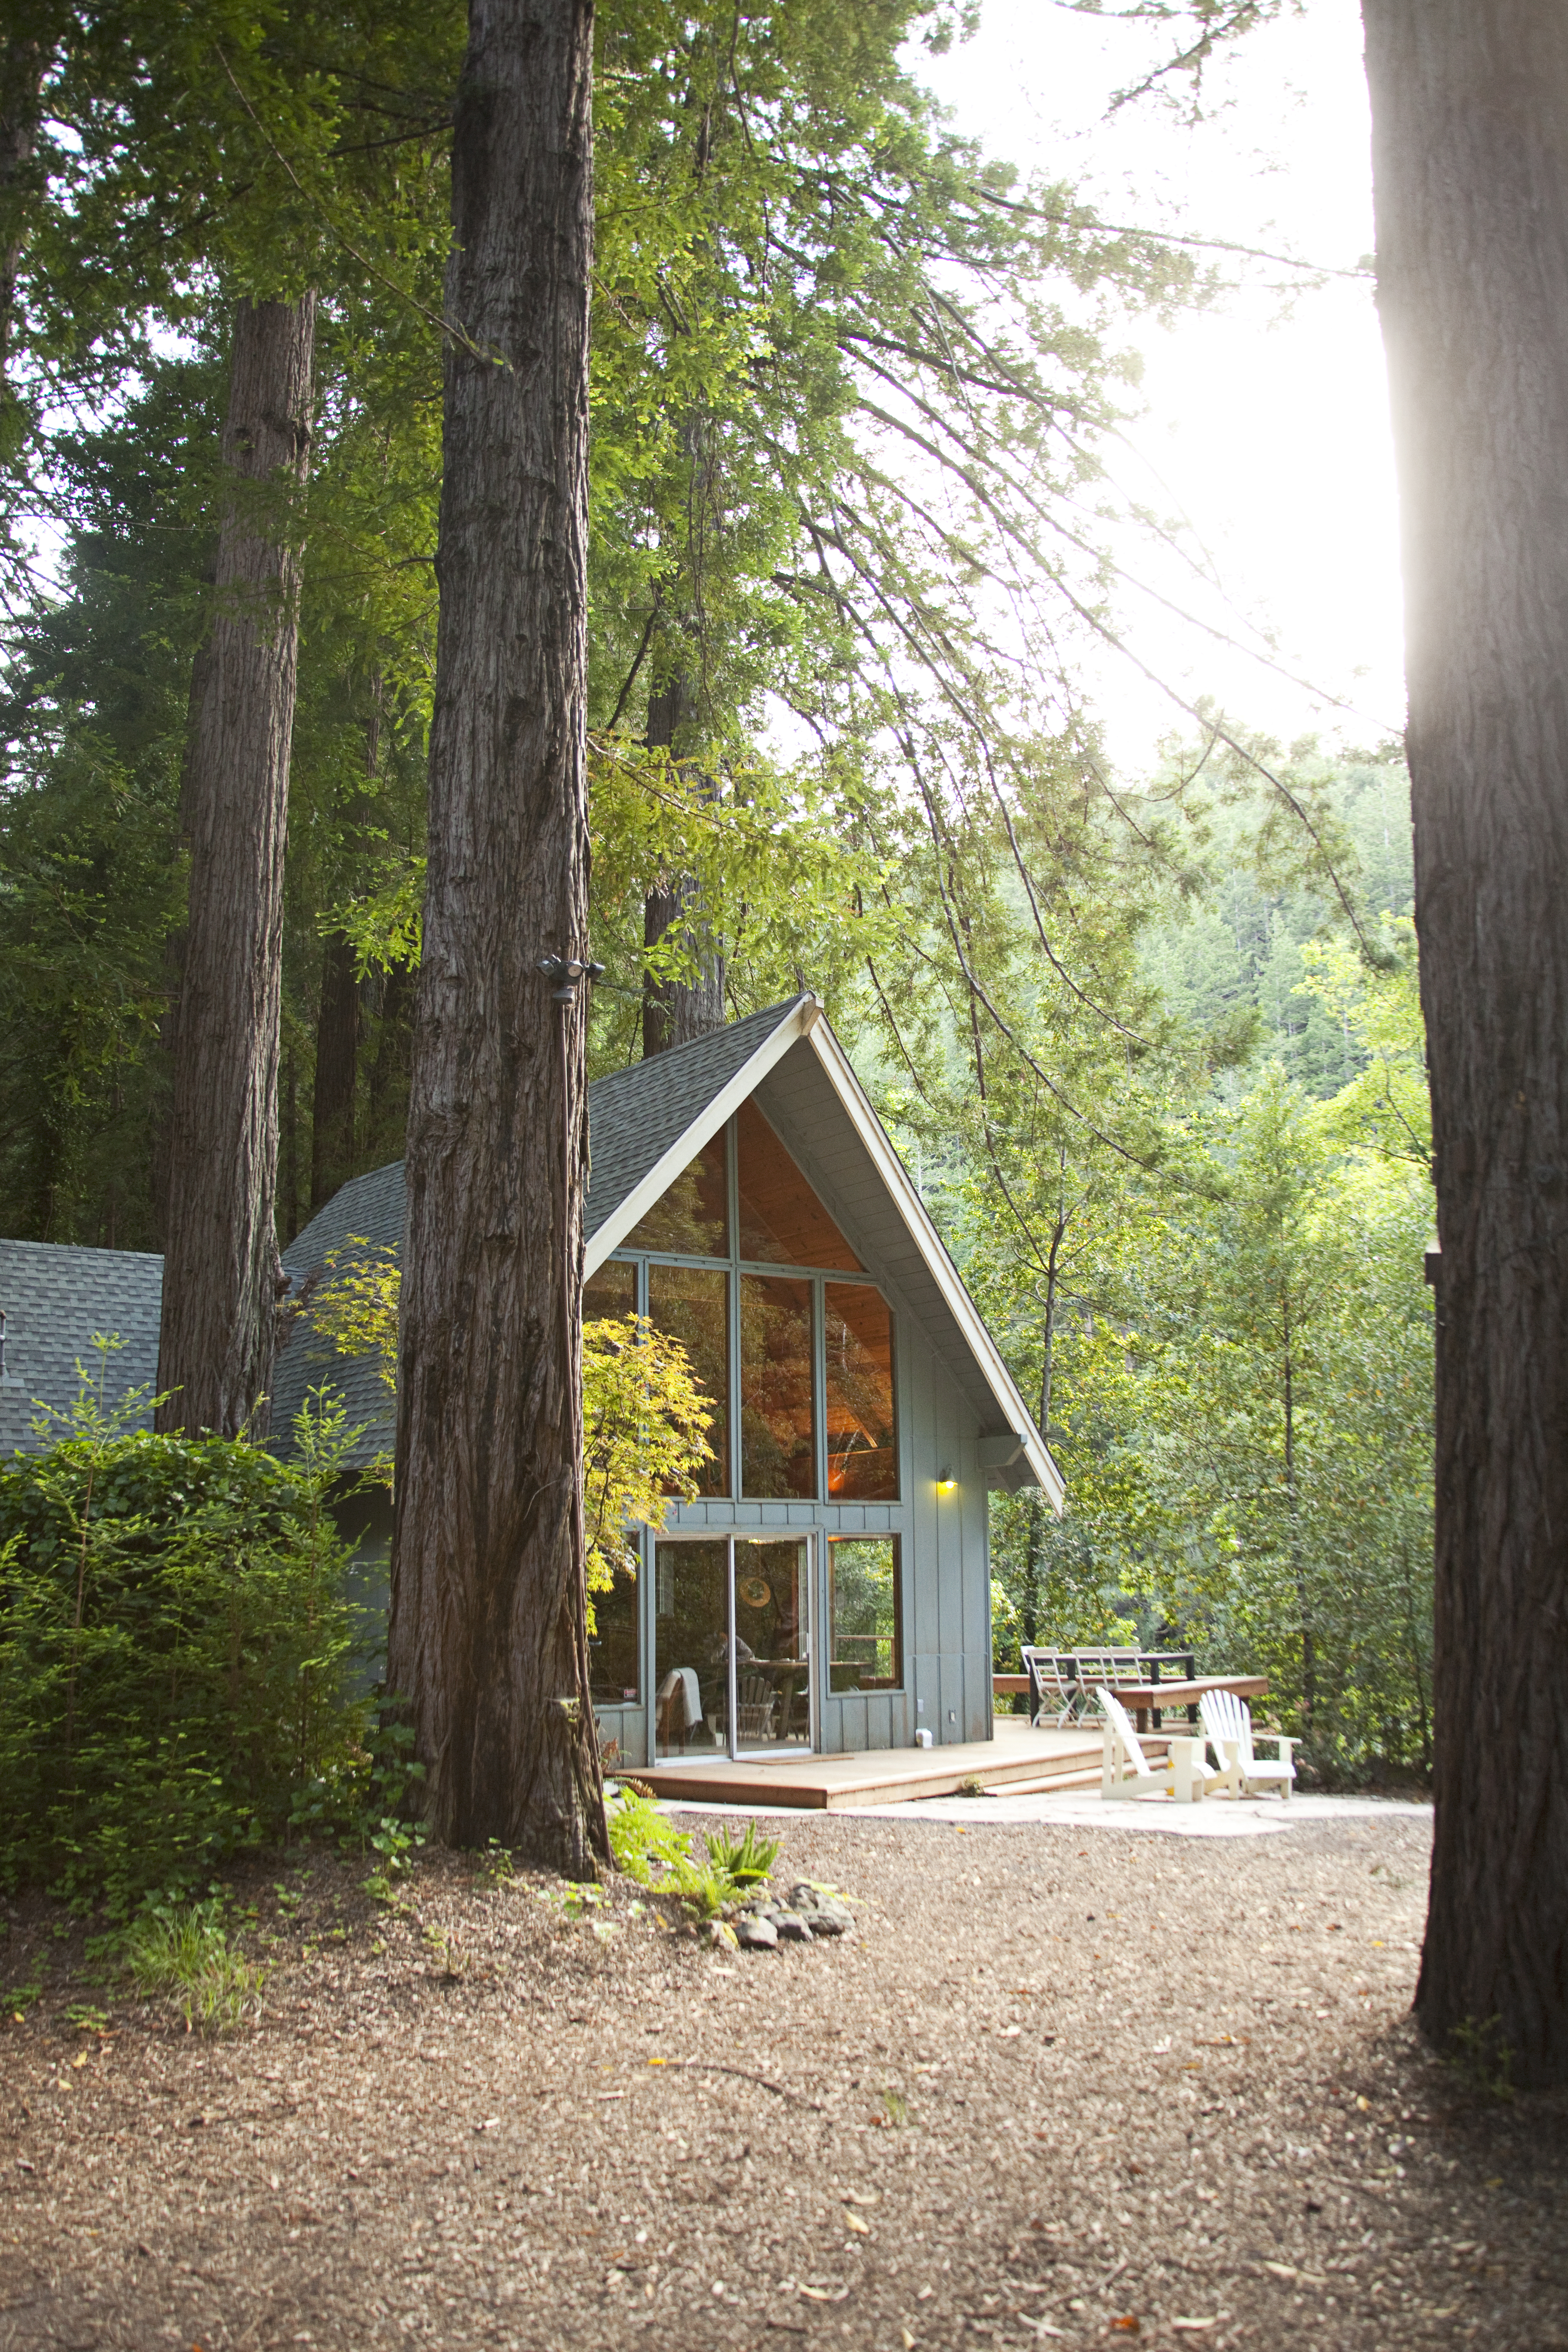 A-Frame cabin in the California redwoods